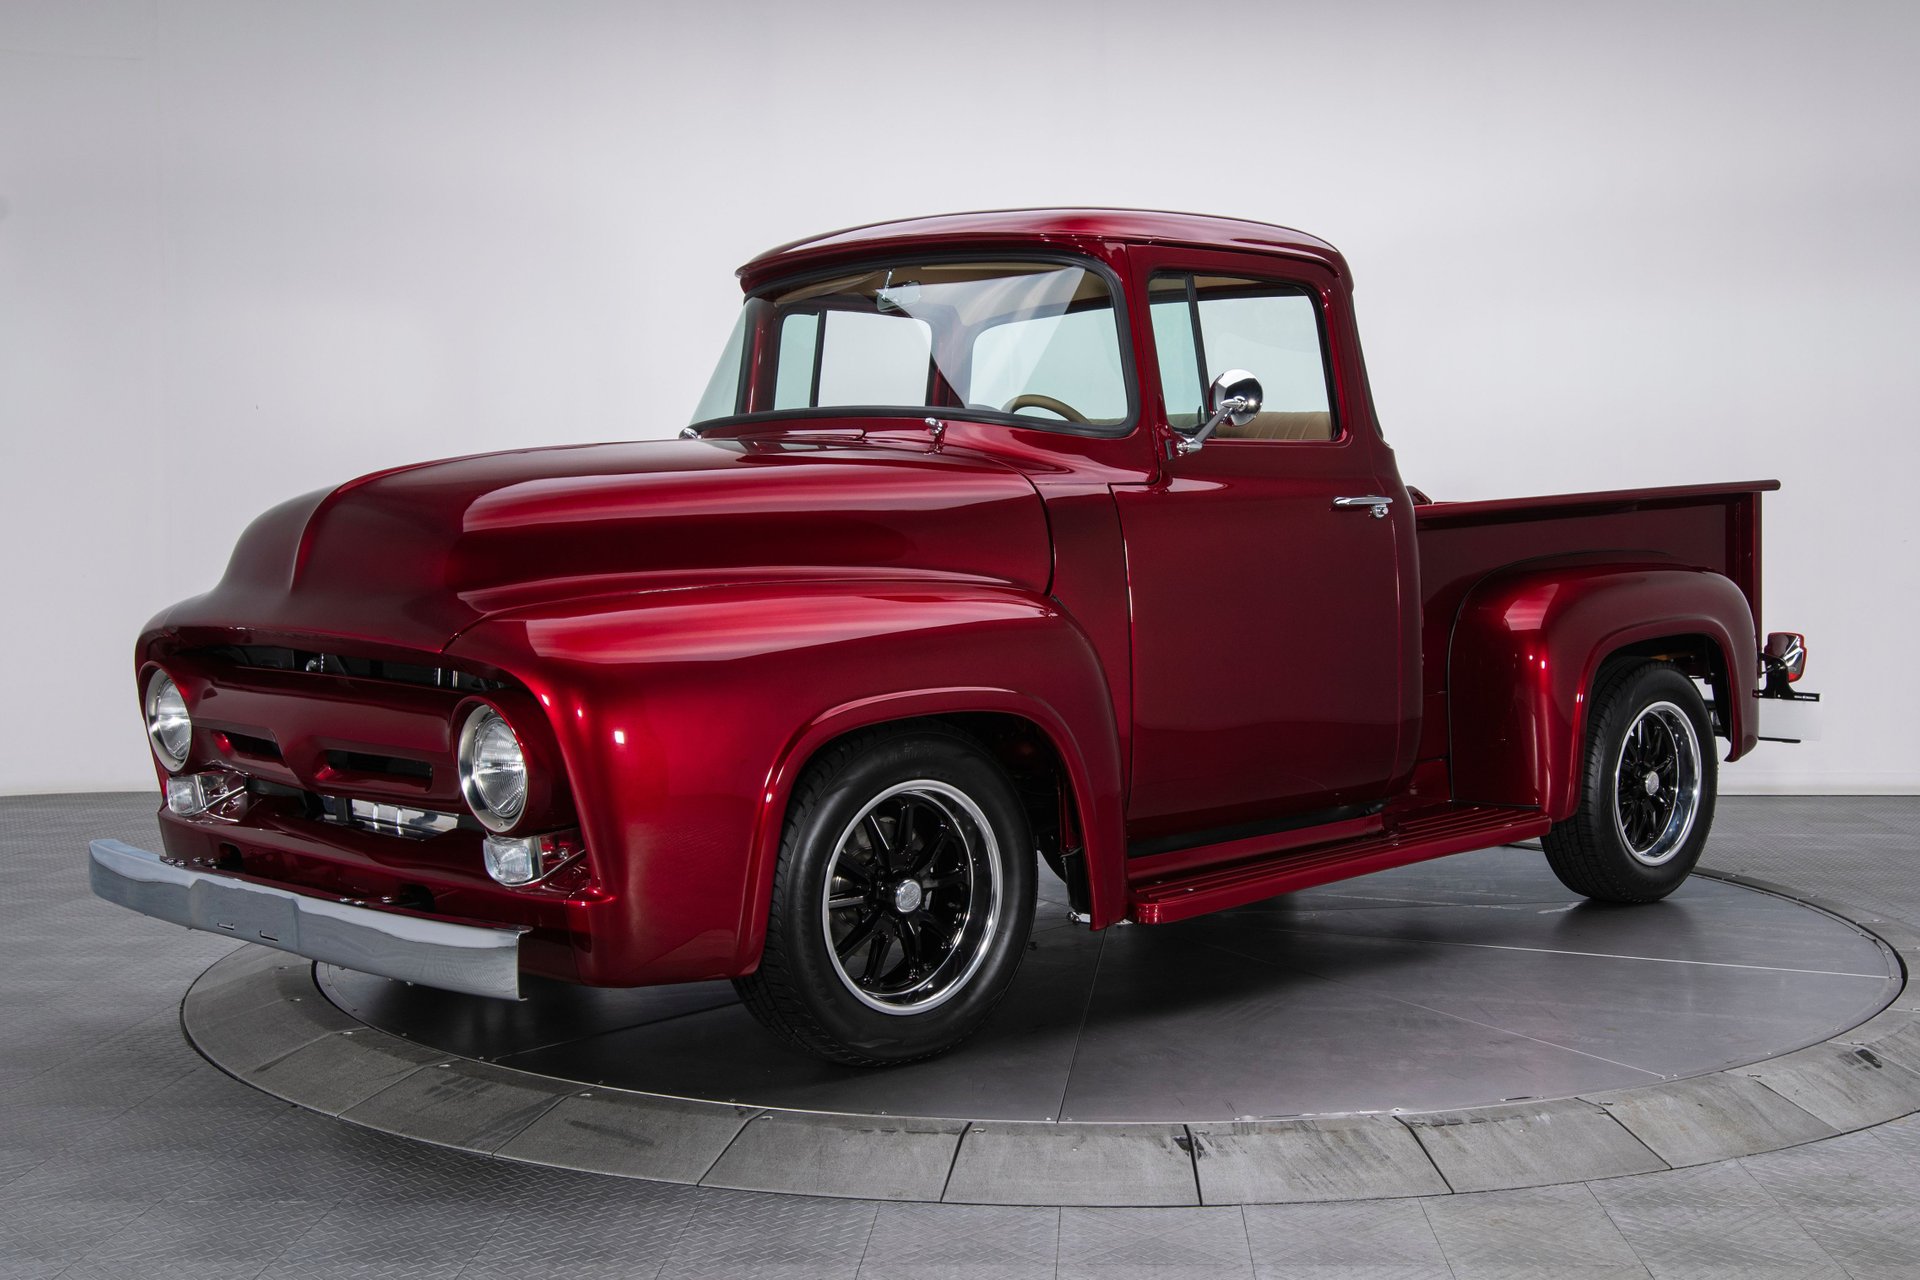 RK Motors Charlotte on X: Anyone in the mood for a little candy? House Of  Kolor Brandywine candy, that is. 😉 #Ford #F100 #FordTrucks #FordNation  #FordF100 #V8 #Truck #Pickup #ClassicCars #ClassicCarsDaily #HouseOfKolor #